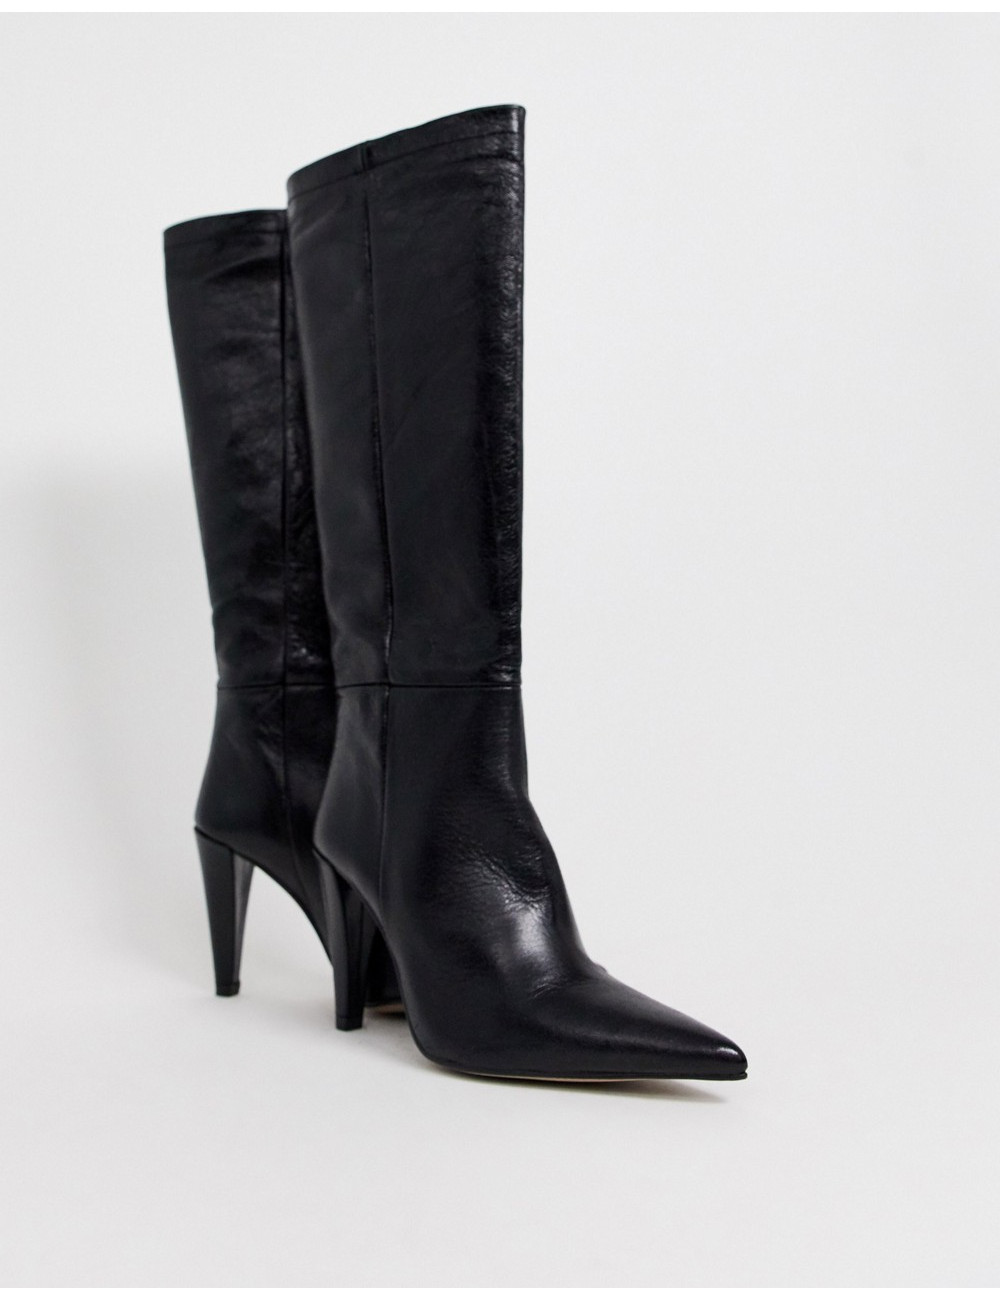 Topshop over the knee boots...